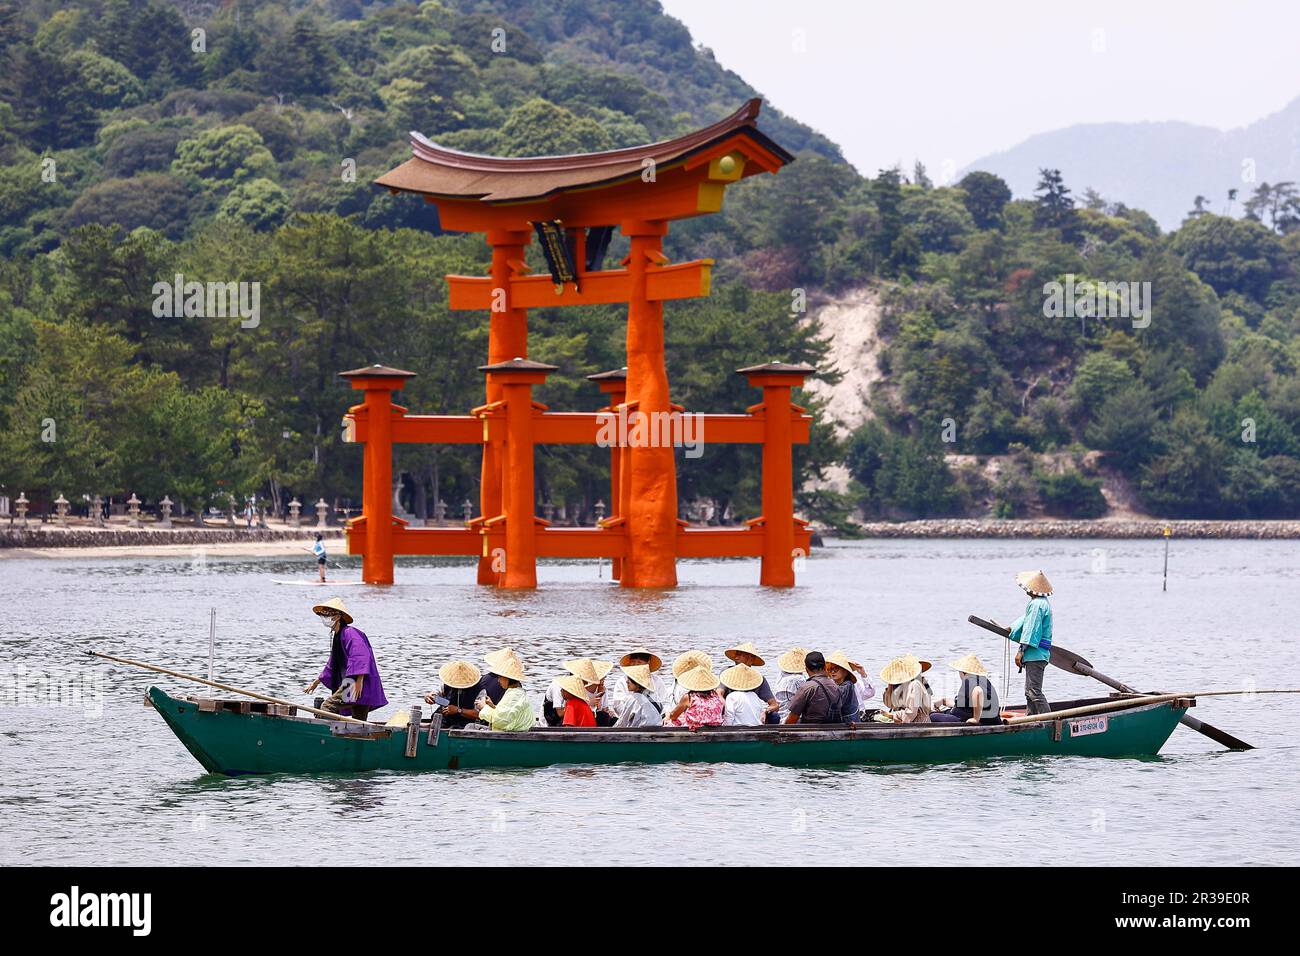 Miyajima, Japan, May 22, 2023 - Tourists look at the Grand Torii Gate from a boat in Miyajima. Visitors returned to Itsukushima-jinja Shrine a day after the leaders’ meeting G7 Hiroshima Summit ended on May 21. The Shinto shrine is well known for its iconic floating Itsukushima Jinja Otorii (Grand Torii Gate) and World Heritage Site. Stock Photo